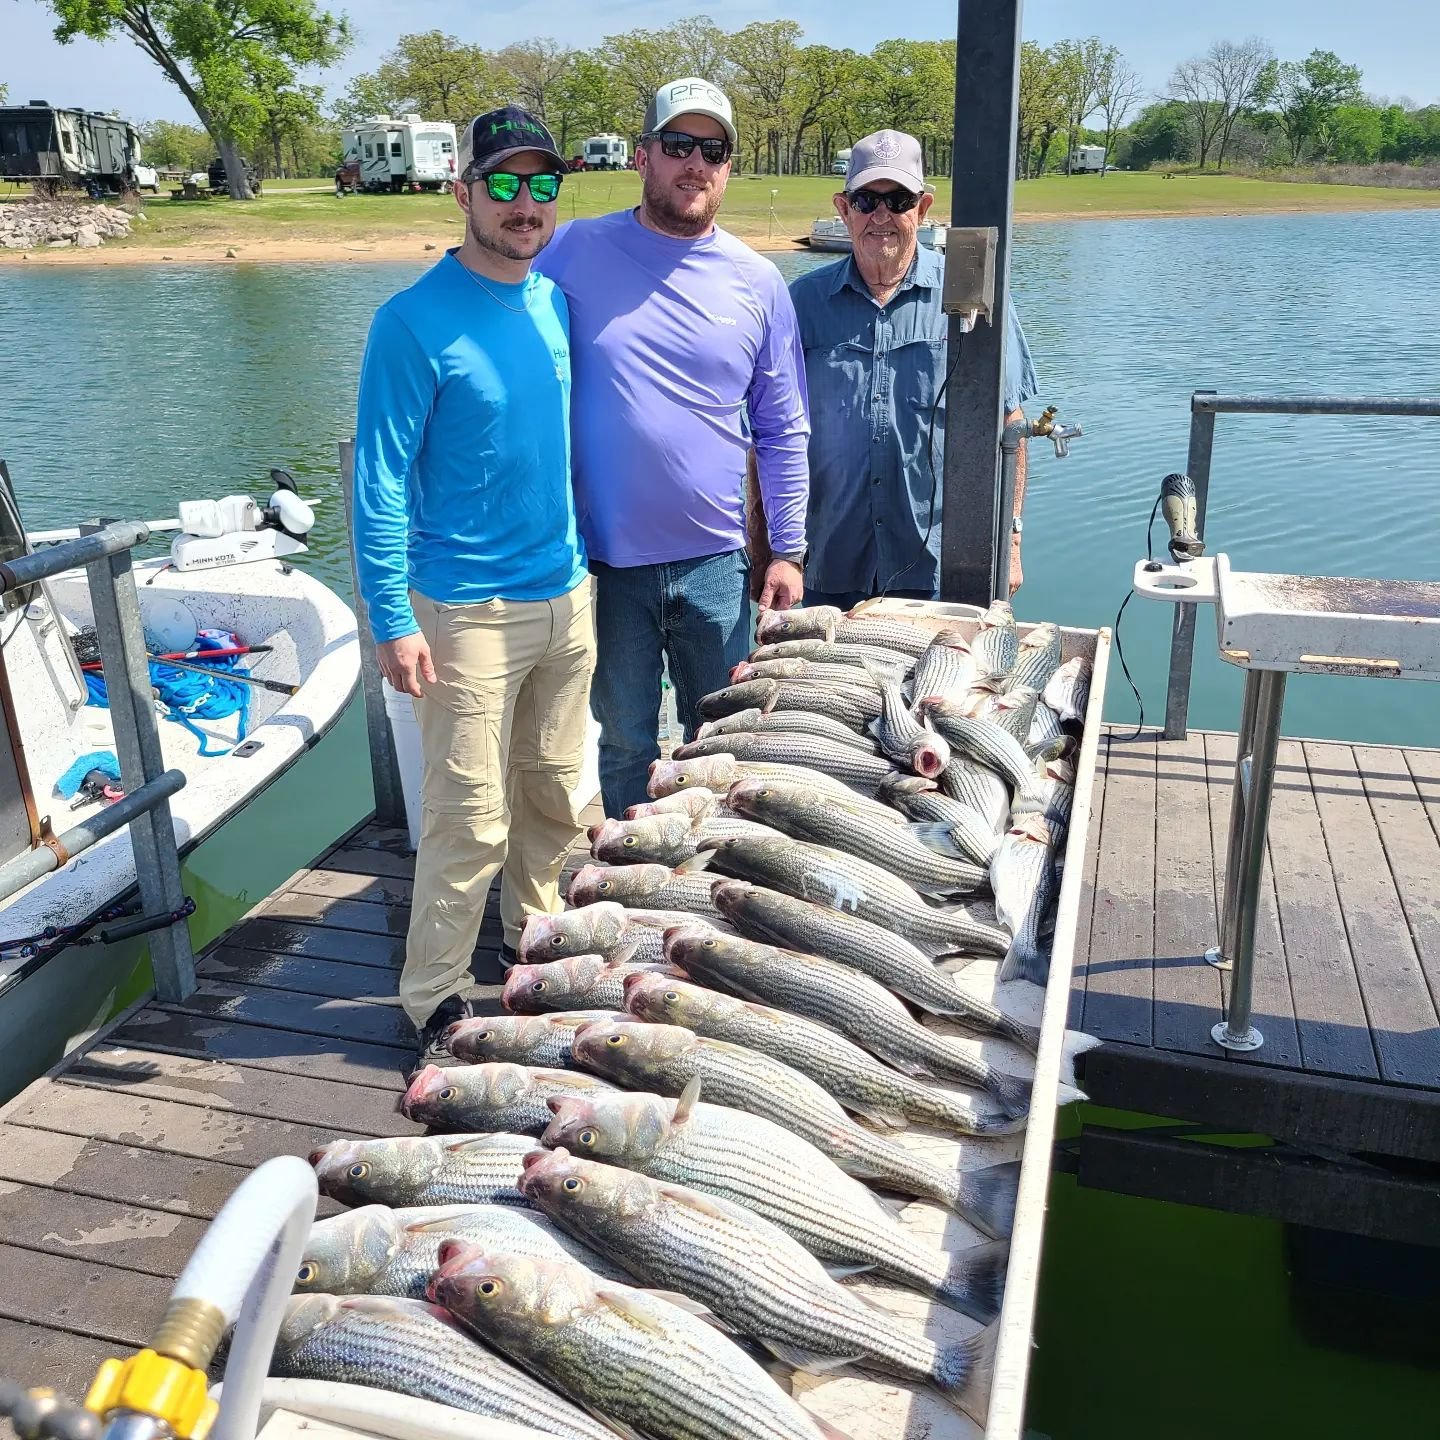 Started off the week with a limit in the morning and a solar eclipse in the afternoon. Pretty solid for a Monday. Thank you guys for making the trip to fish with us! 

#GoodTimesFishingCo #LakeTexoma #OklahomaFishing #OklahomaFishingTrail #OKStatePar